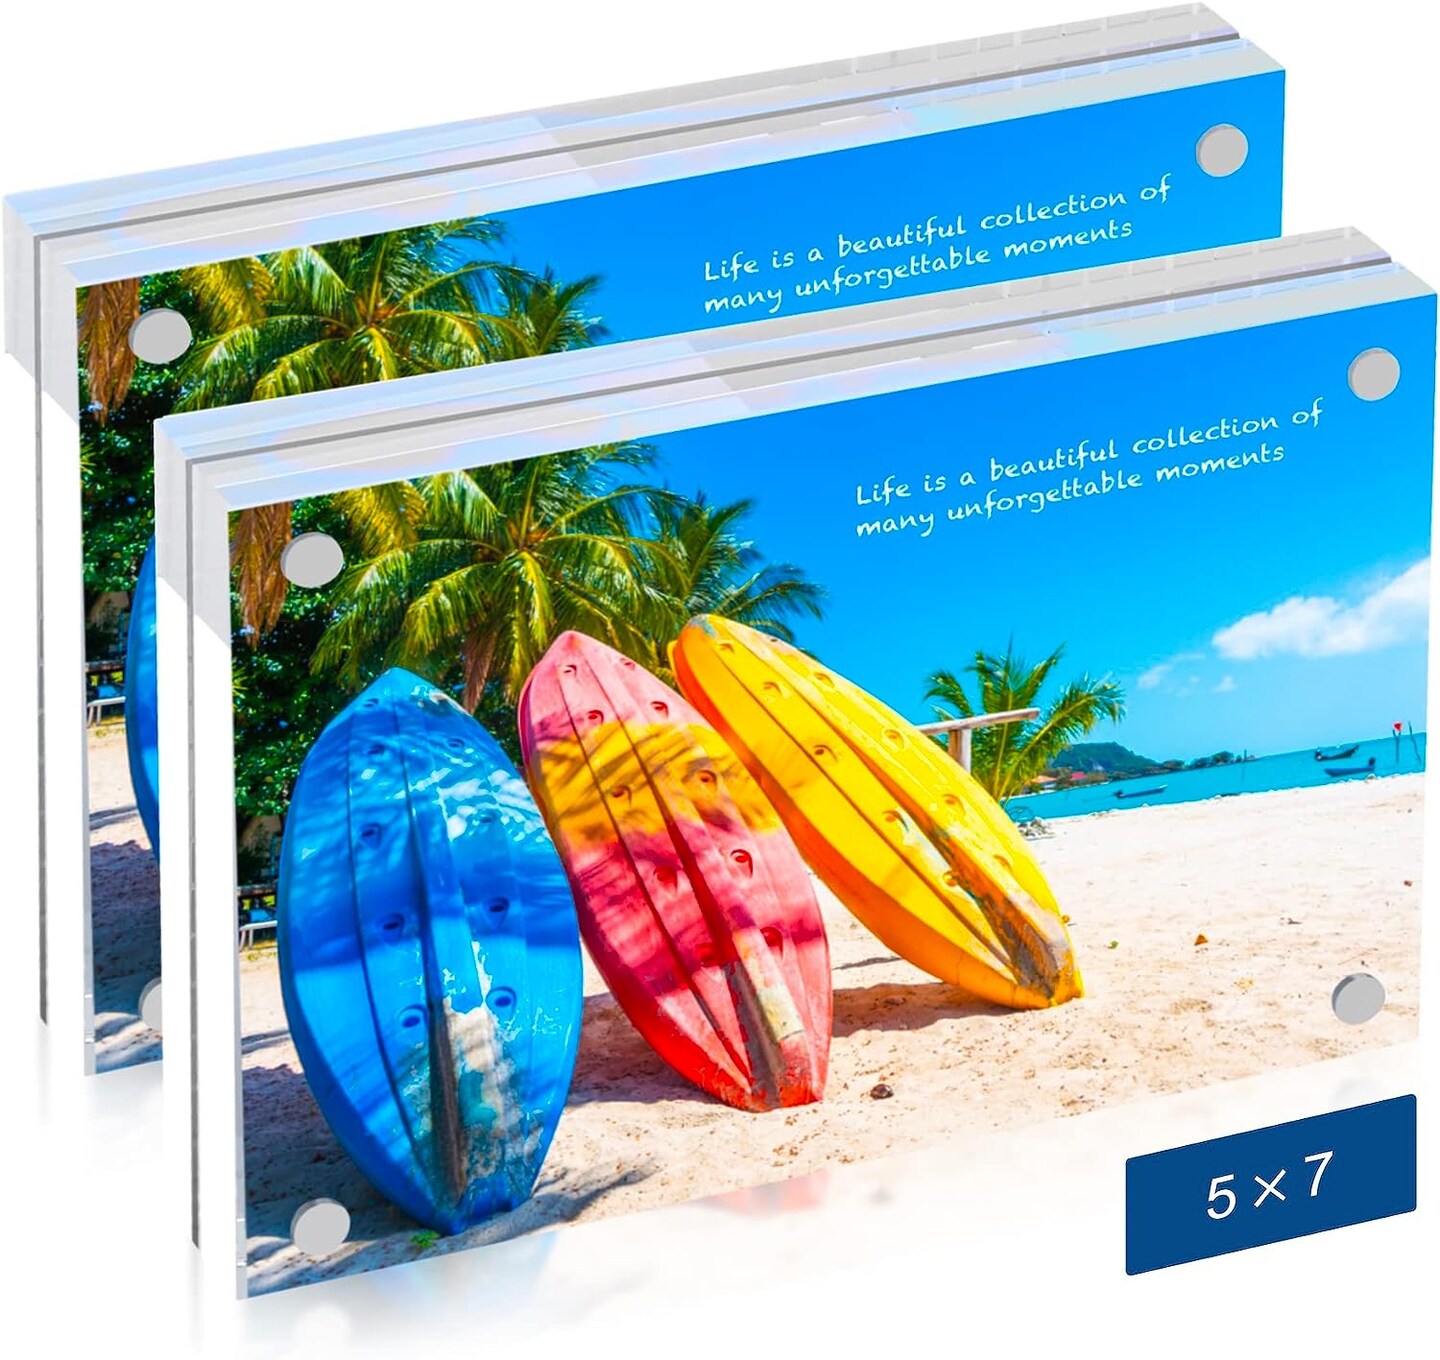 Danoni Picture Frames Acrylic 24mm Thickness Durable Photo Frame Double Sided Clear Display with FREE Microfiber Cloth